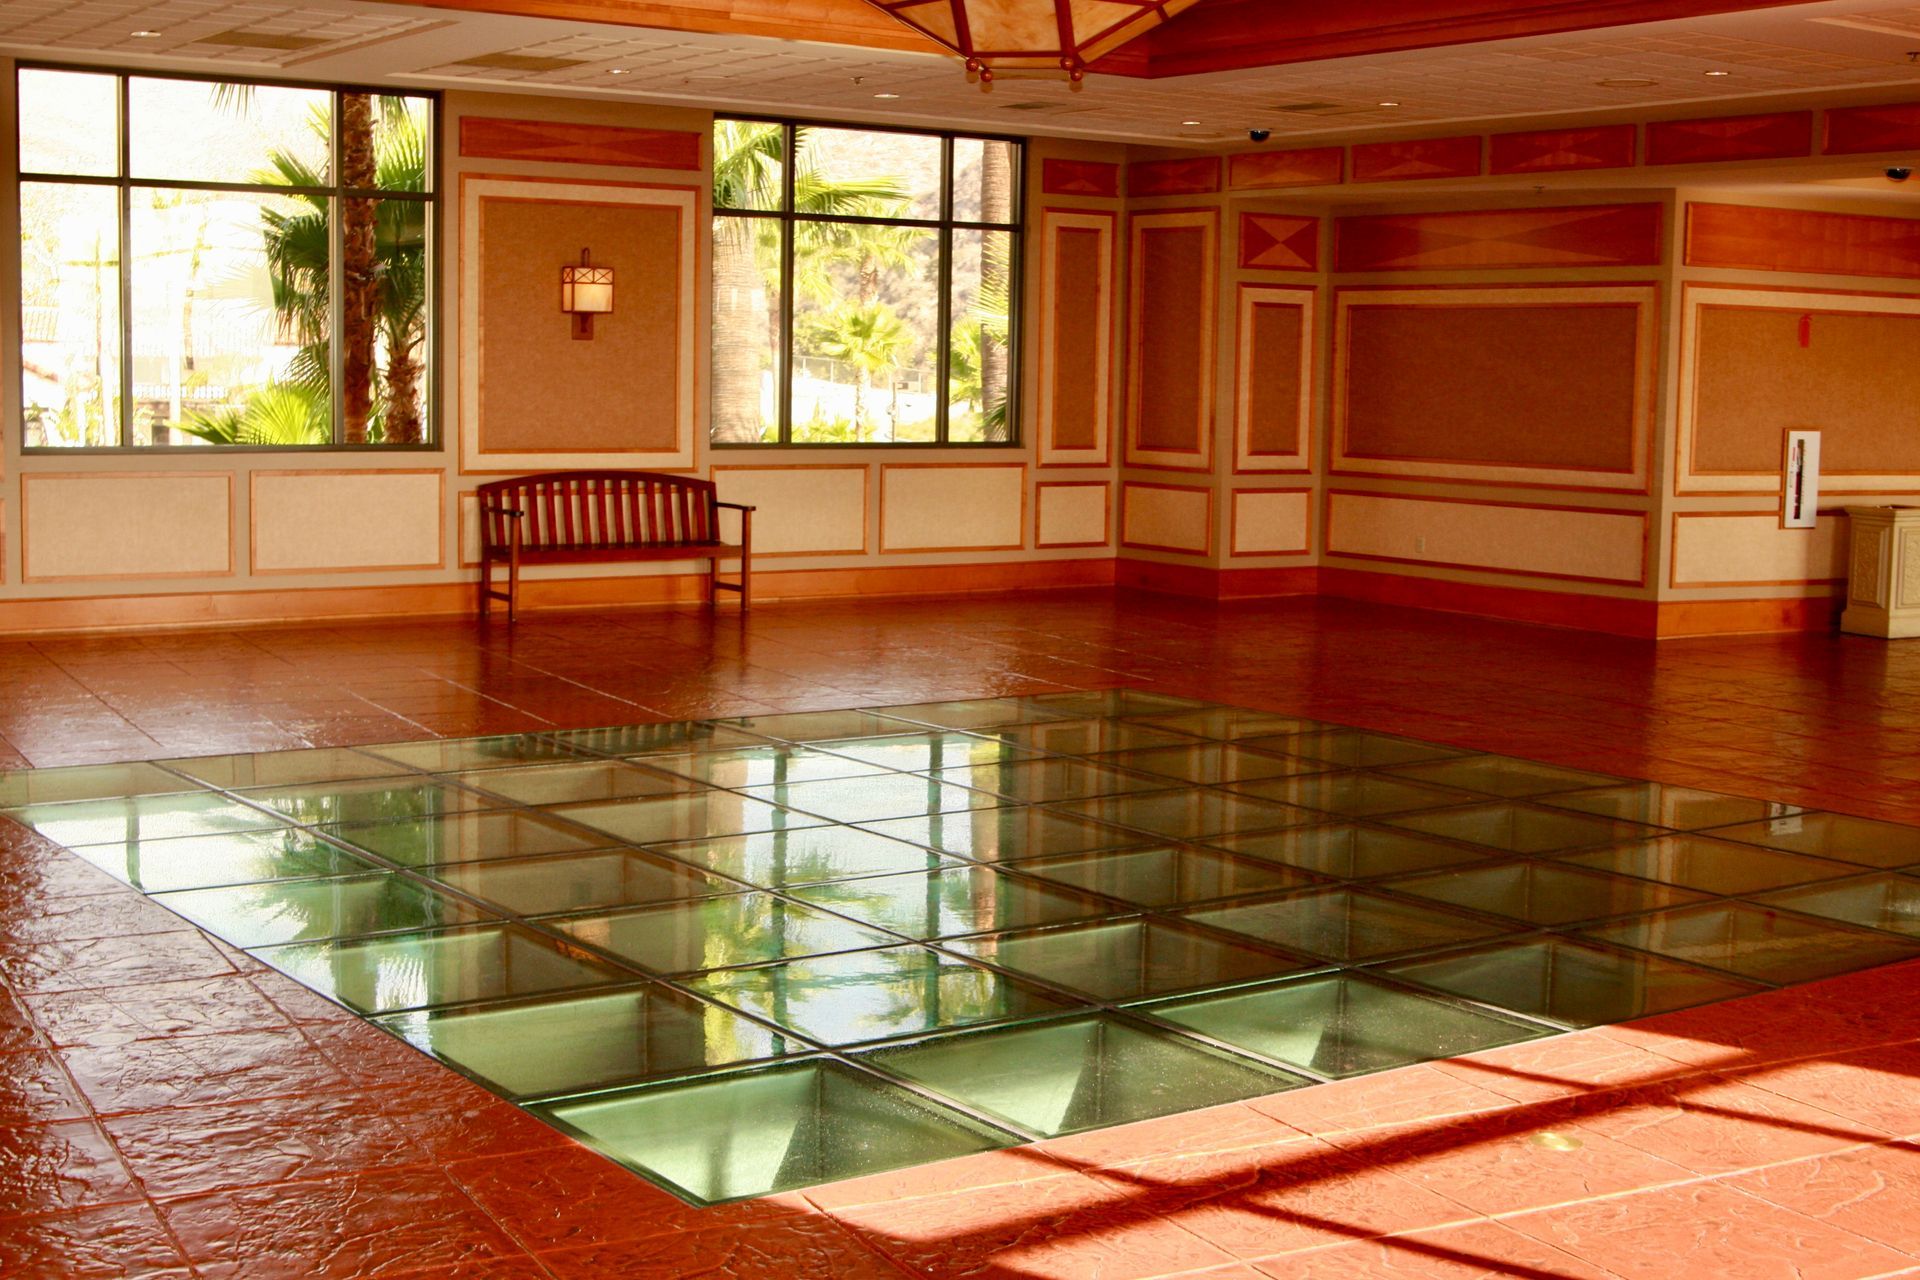 Glass flooring incorporated into tile flooring.